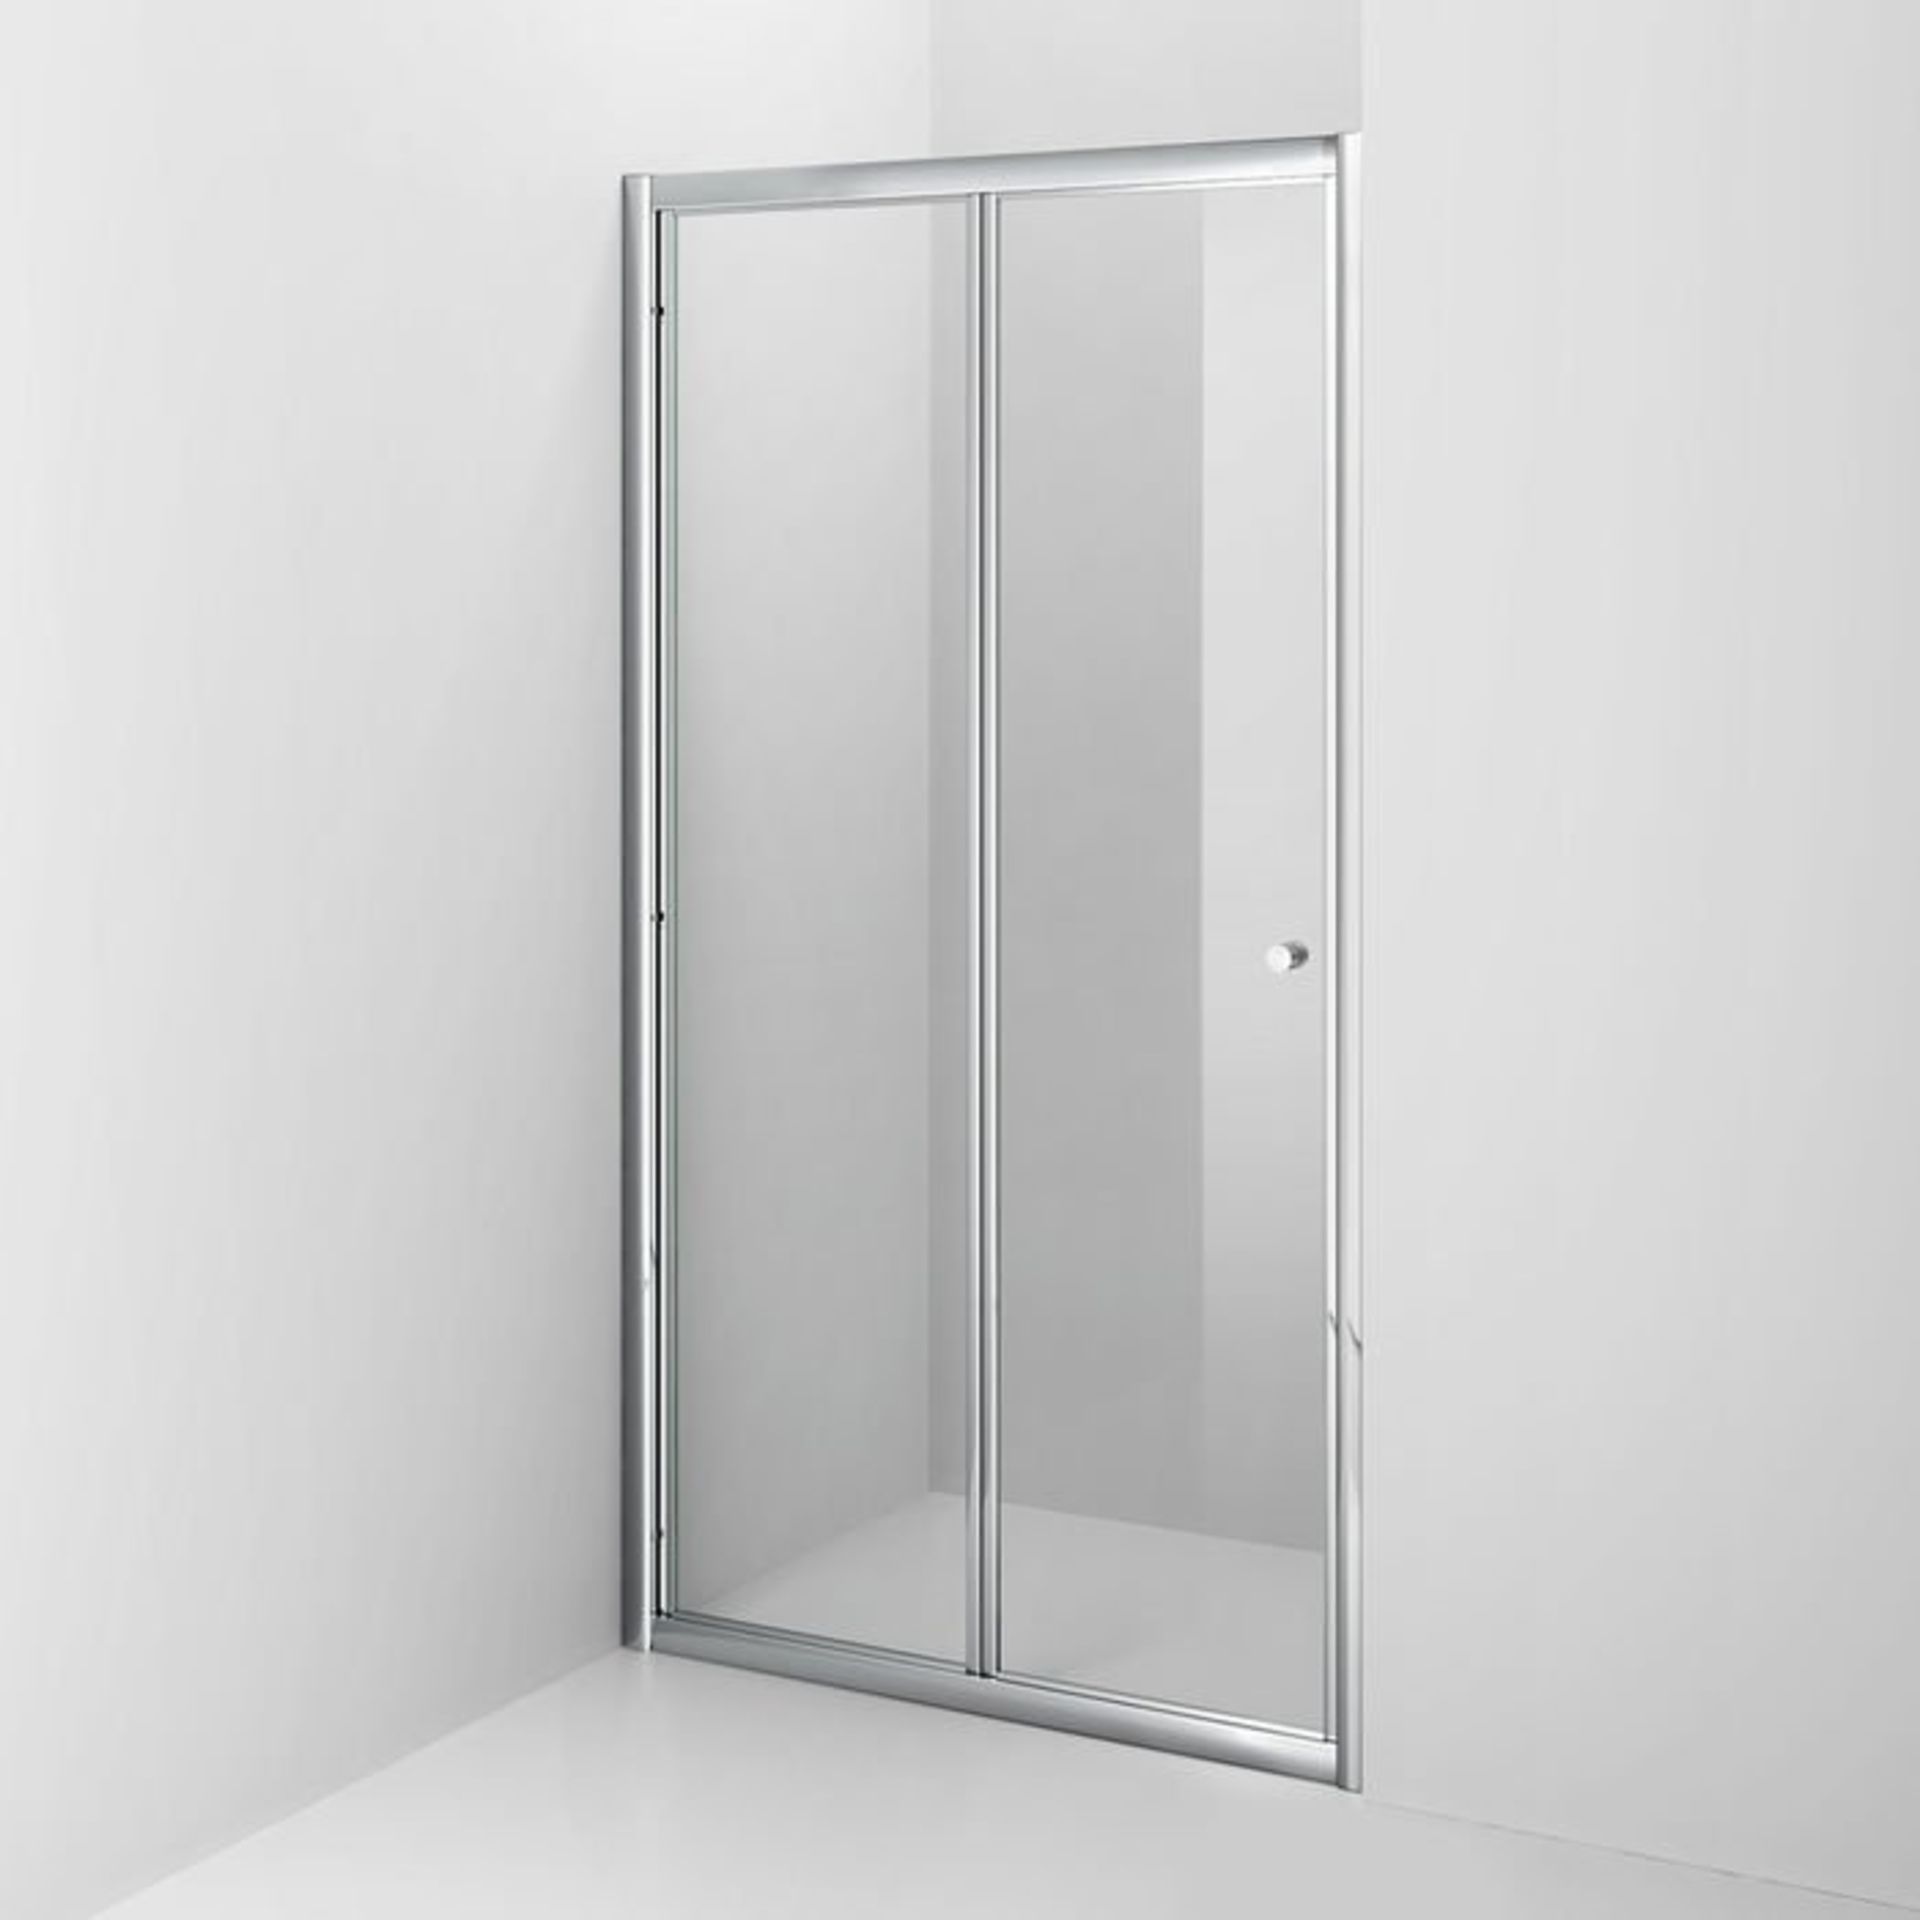 (G41) 1000mm - Elements Bi Fold Shower Door. RRP £299.99. 4mm Safety Glass Fully waterproof tested - Image 4 of 8